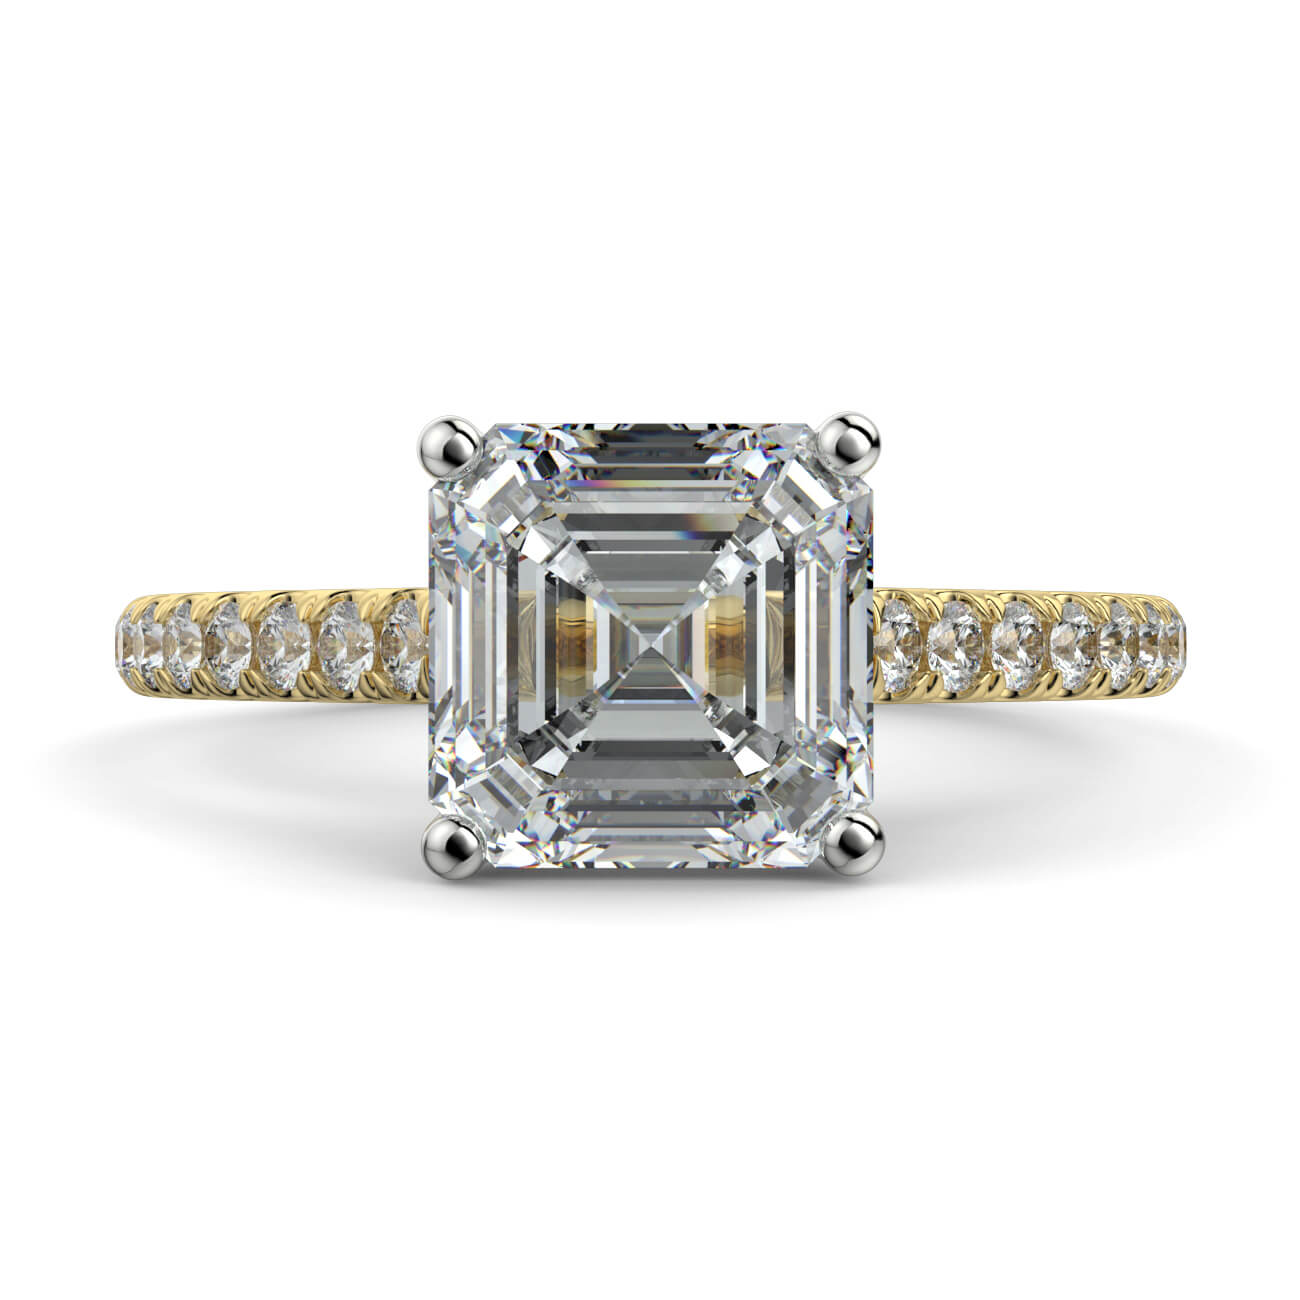 Asscher Cut diamond cathedral engagement ring in yellow and white gold – Australian Diamond Network